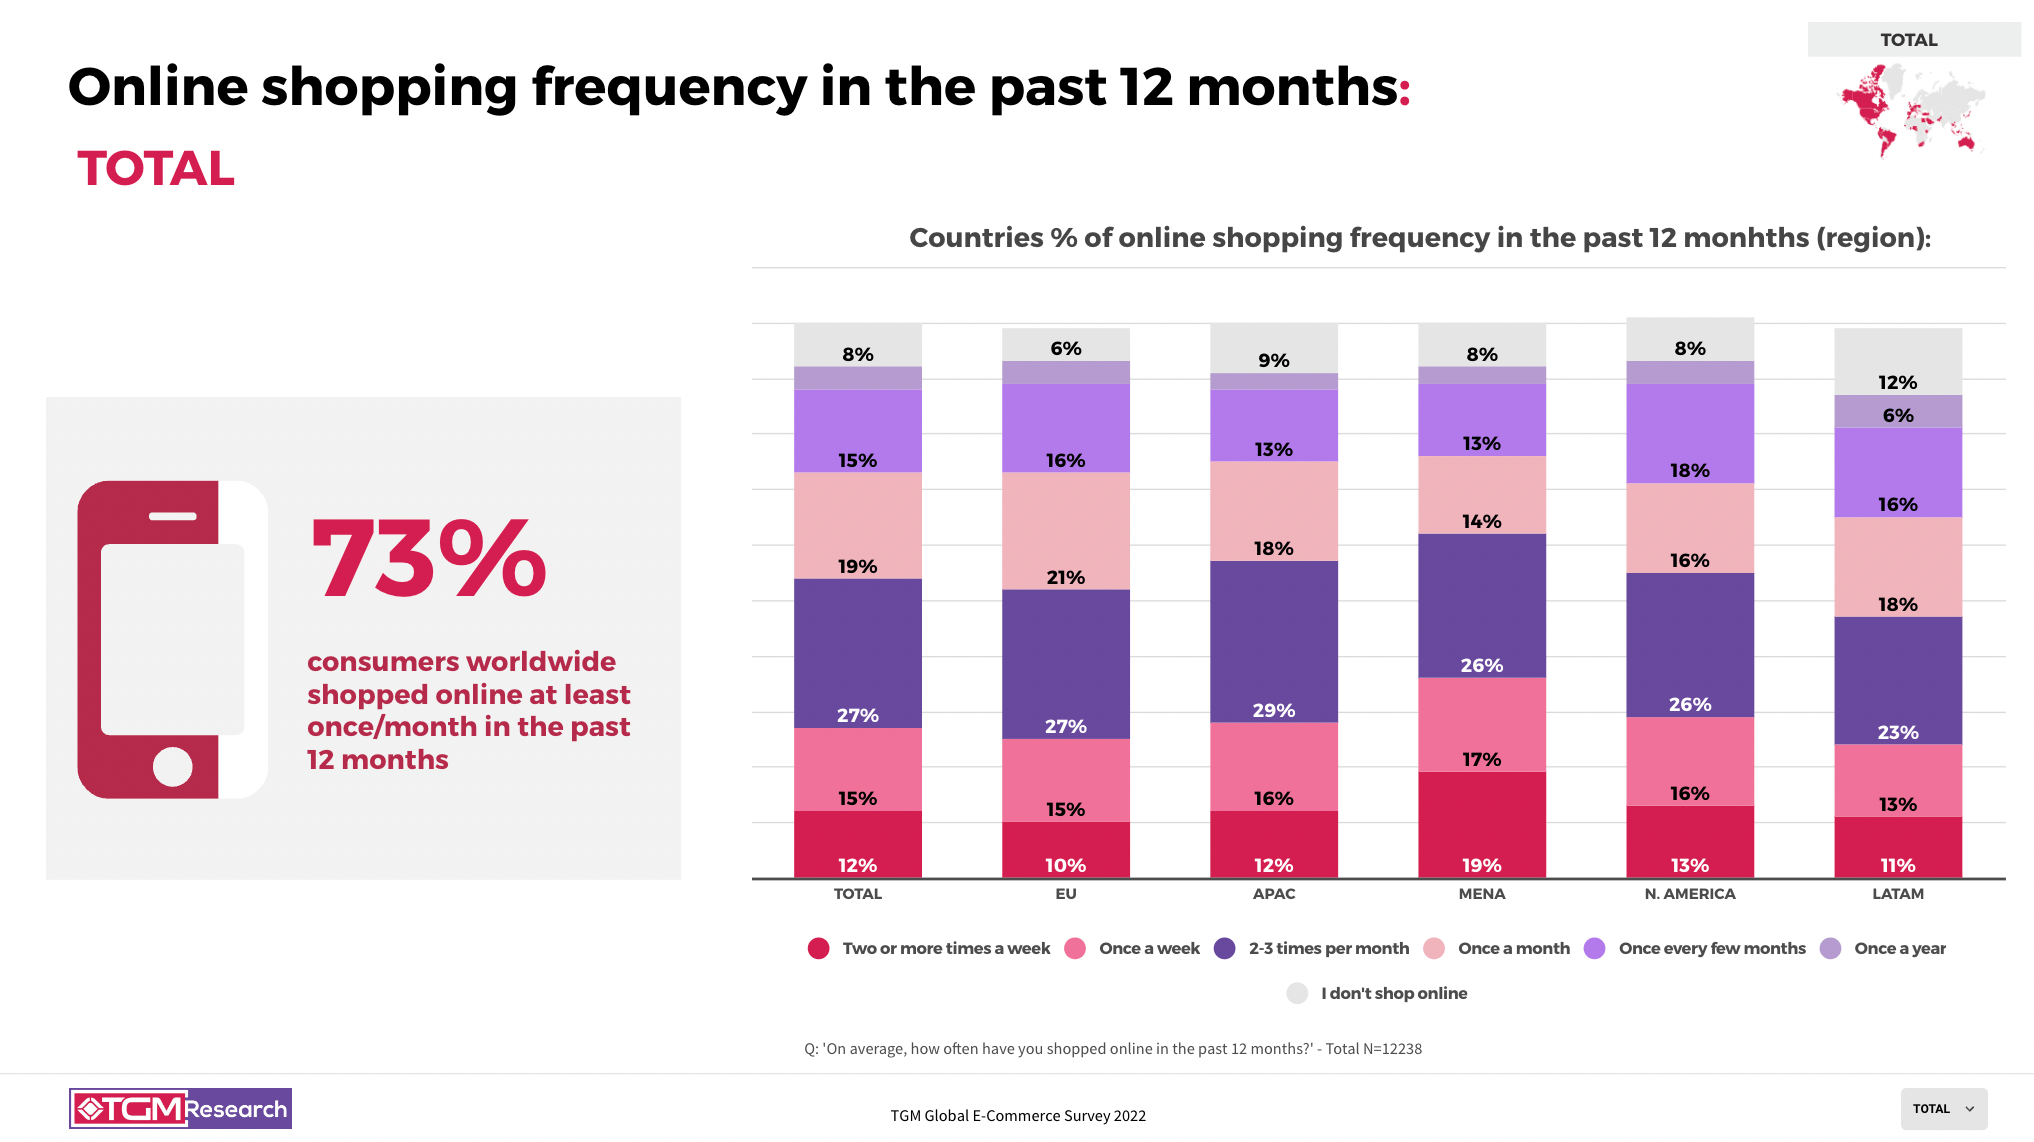 The overall frequency of online purchases